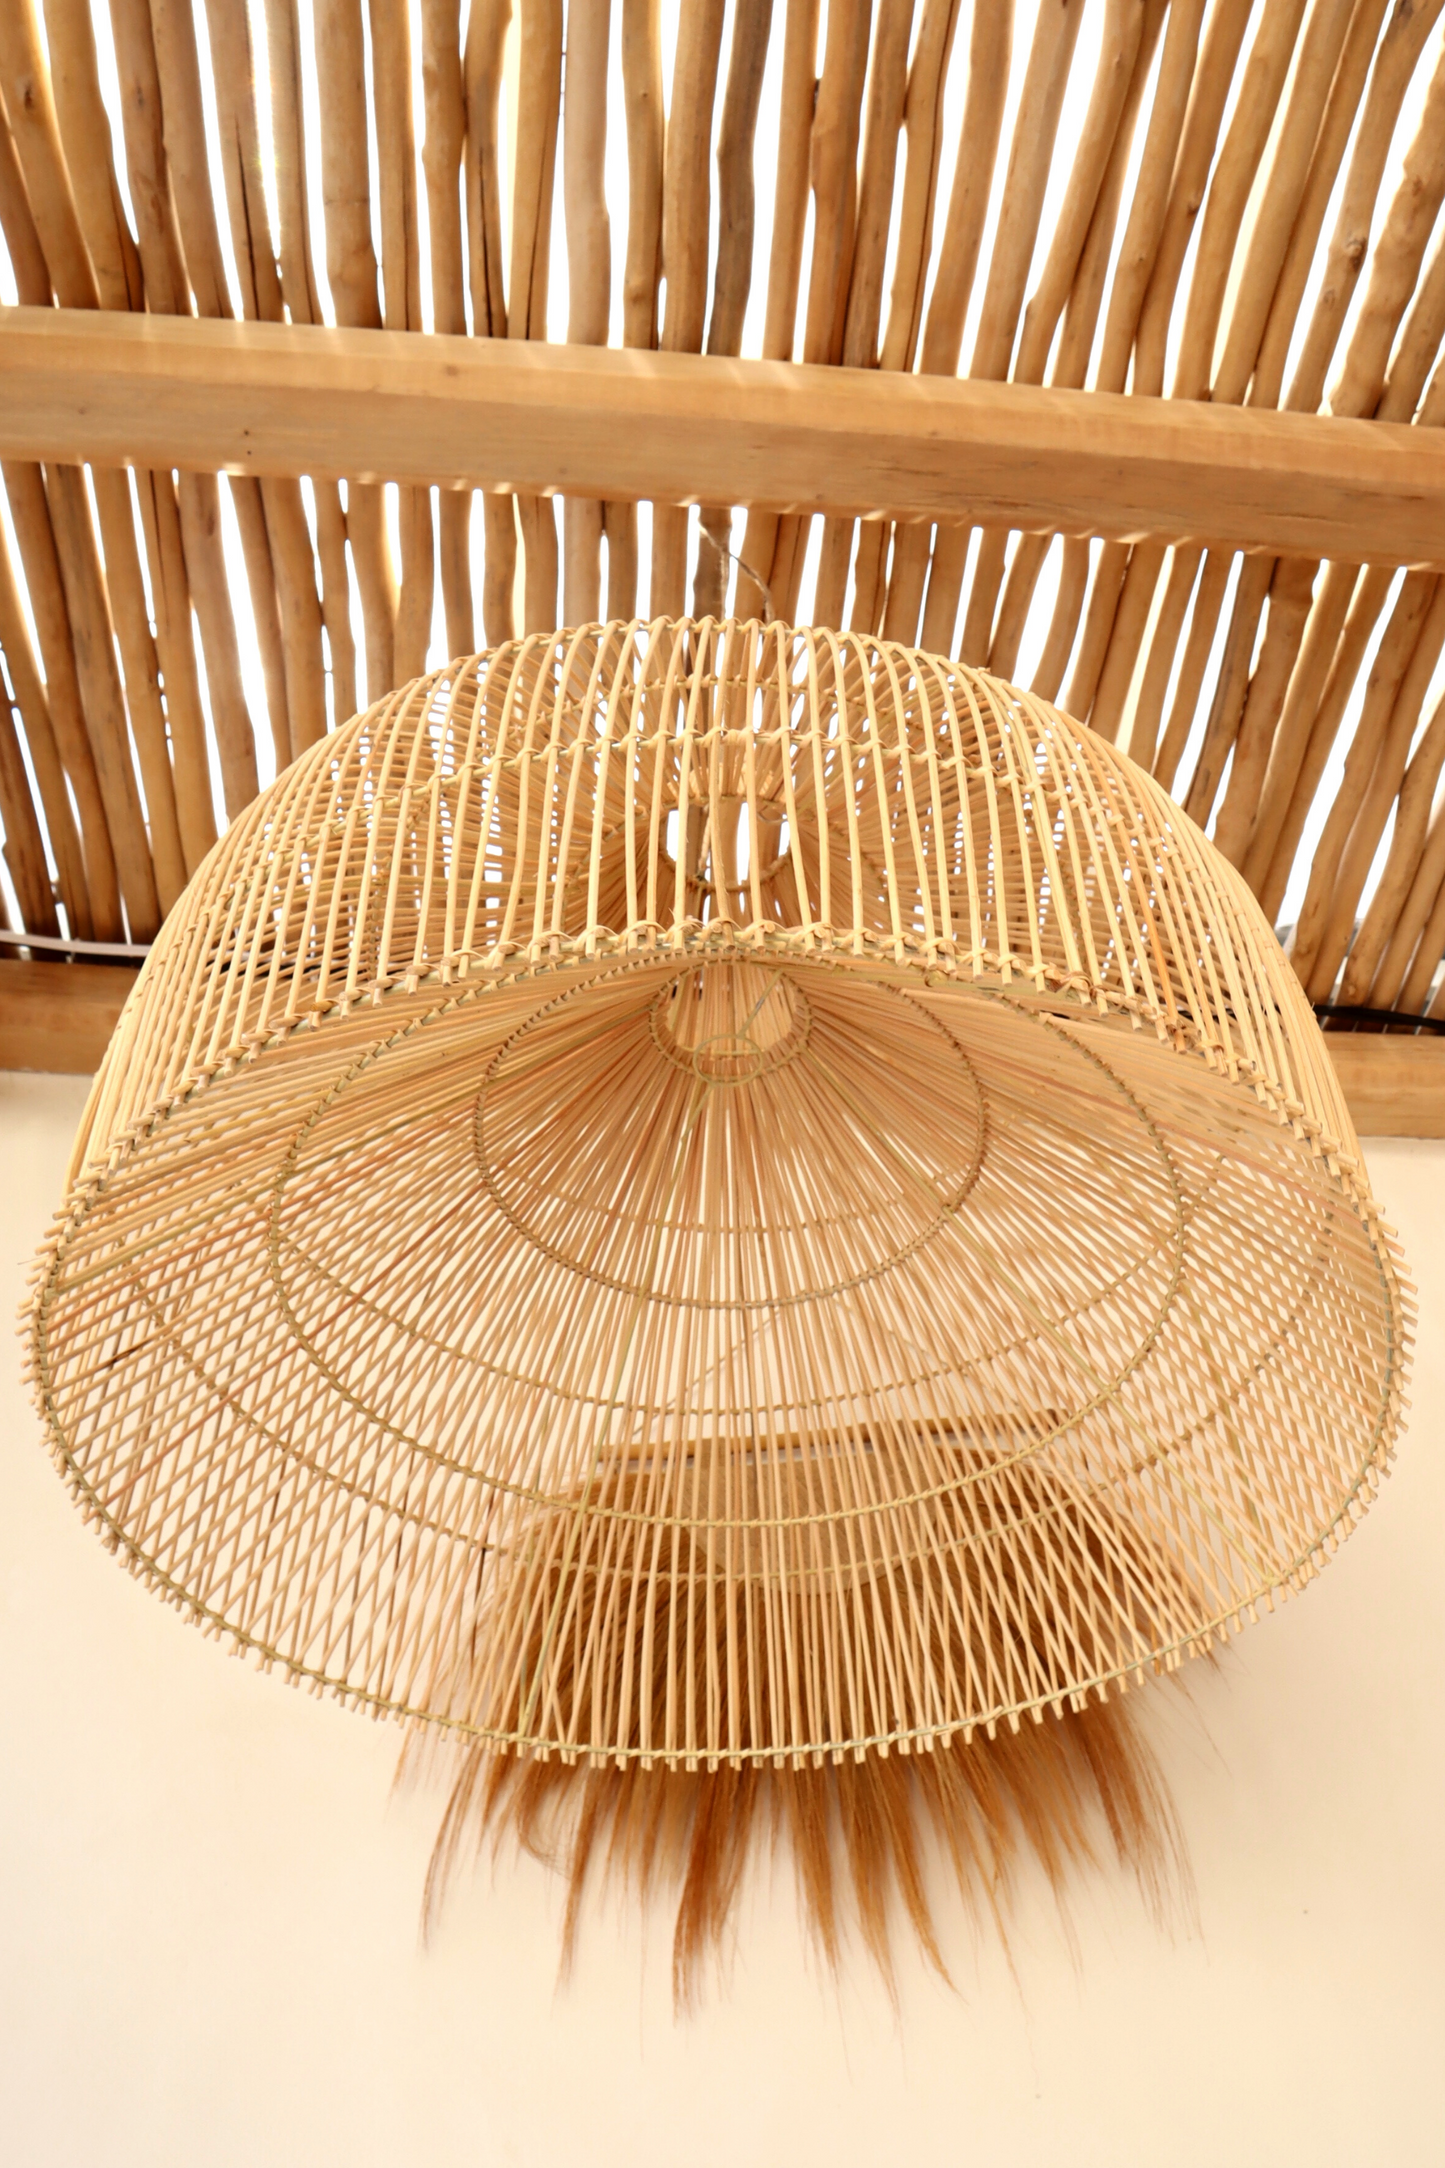 Sienna X-Large Dome Shape Rattan Pendant Light Fitting (Local Delivery Only)